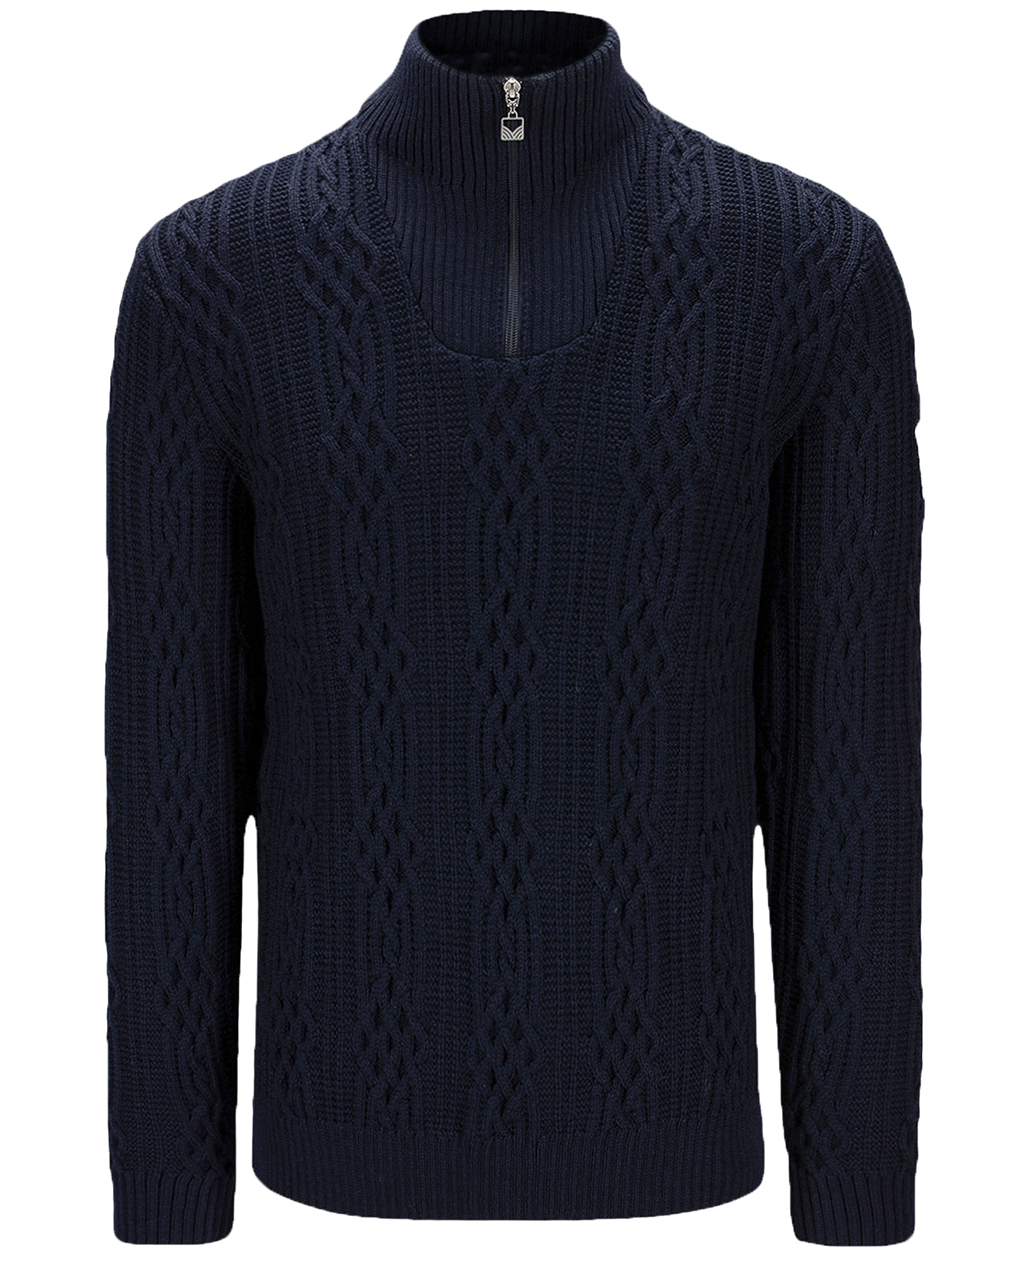 Dale Of Norway Hoven Sweater M Navy (Storlek M)